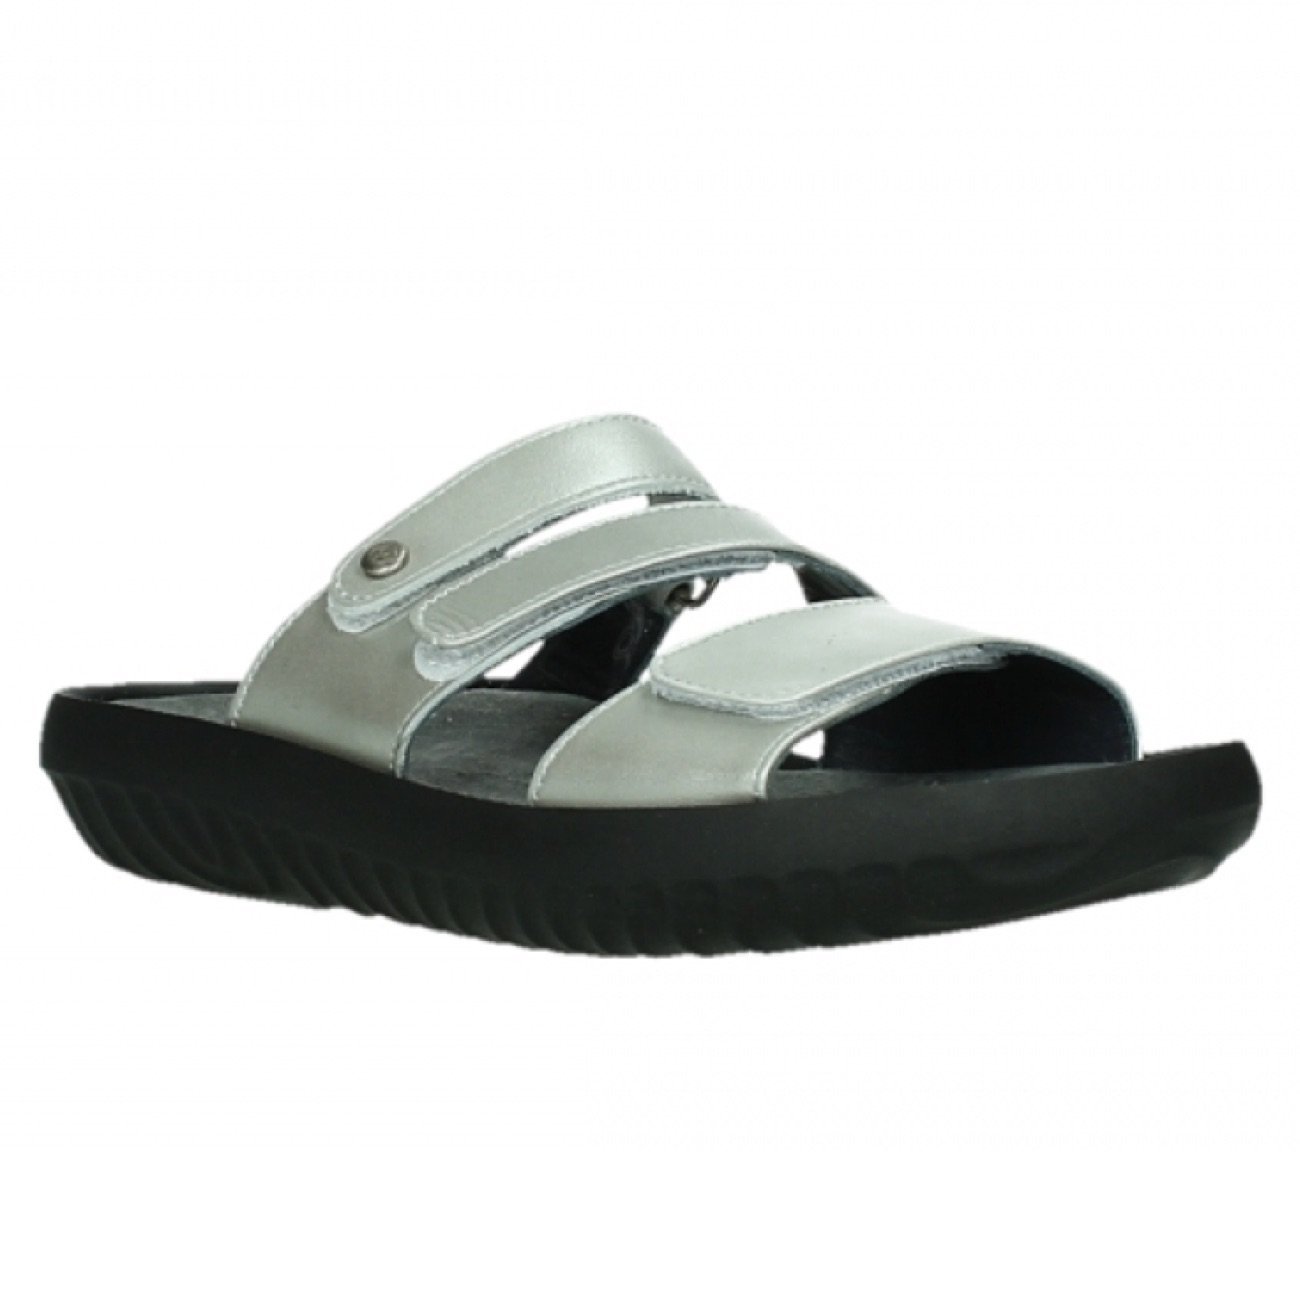 Wolky, Sense, Slide, Leather, 85 130 Silver Sandals Wolky 85 130 36 